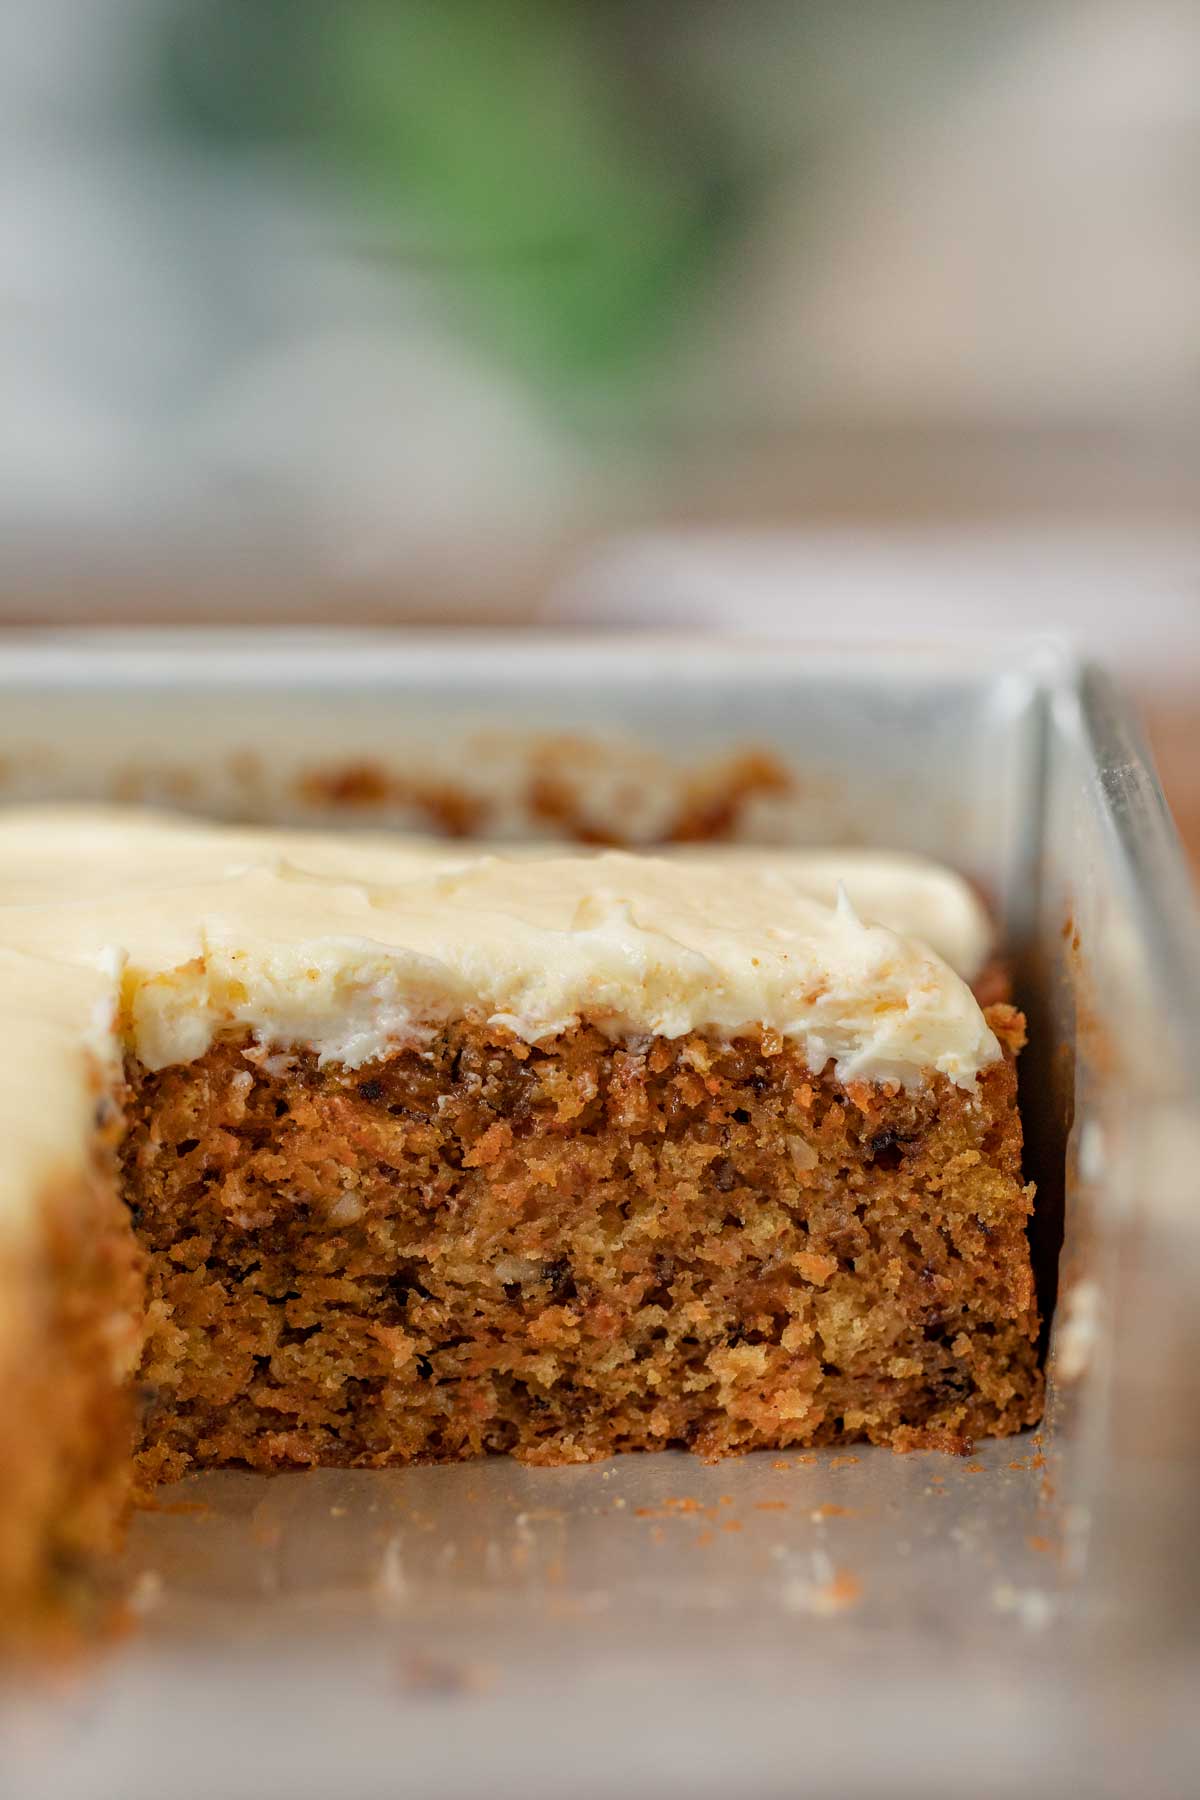 This classic carrot cake hits the spot | king5.com